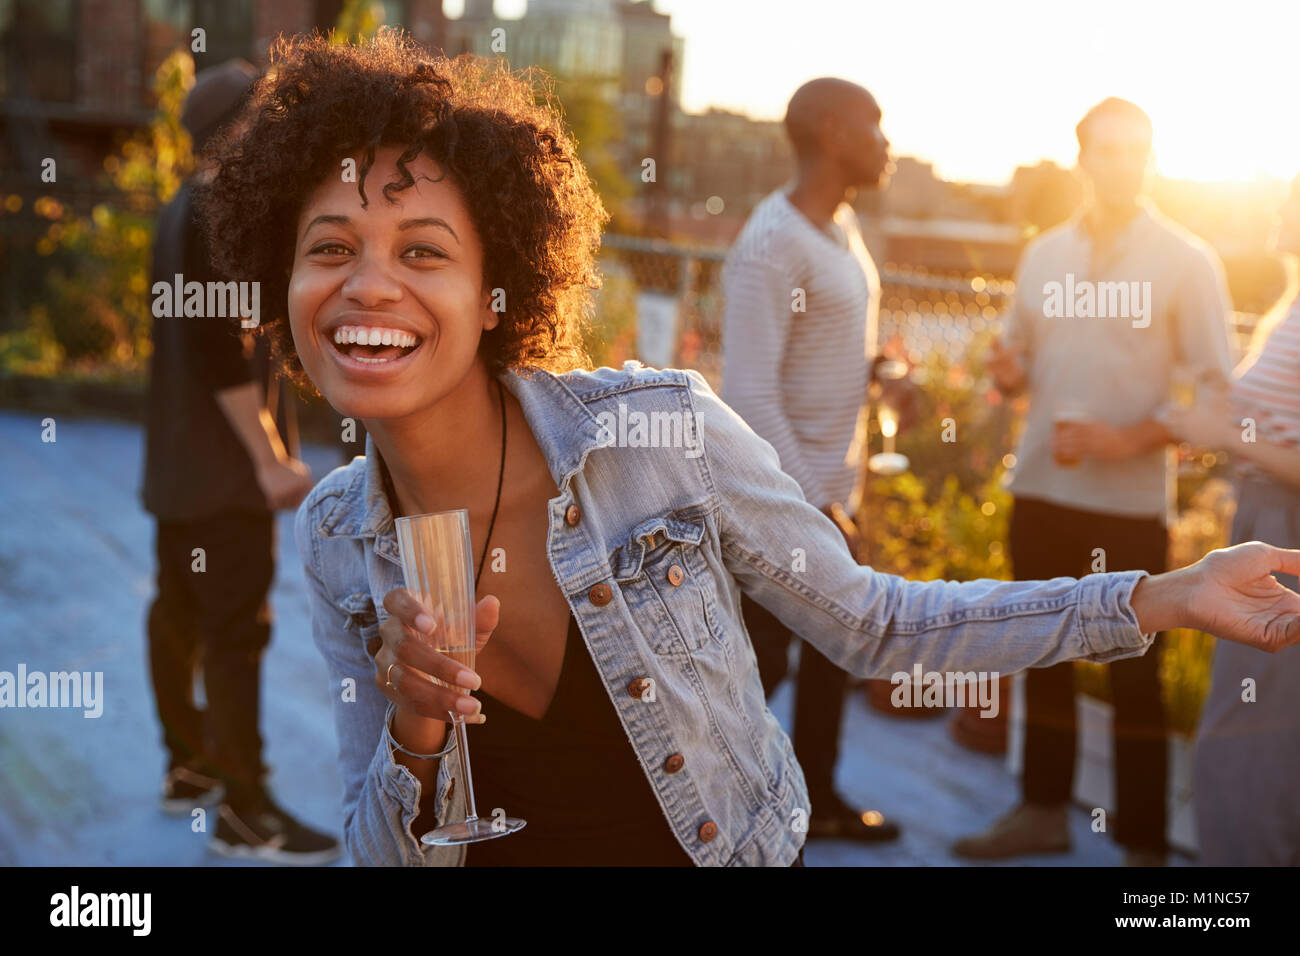 Young woman dancing at a rooftop party smiling to camera Banque D'Images